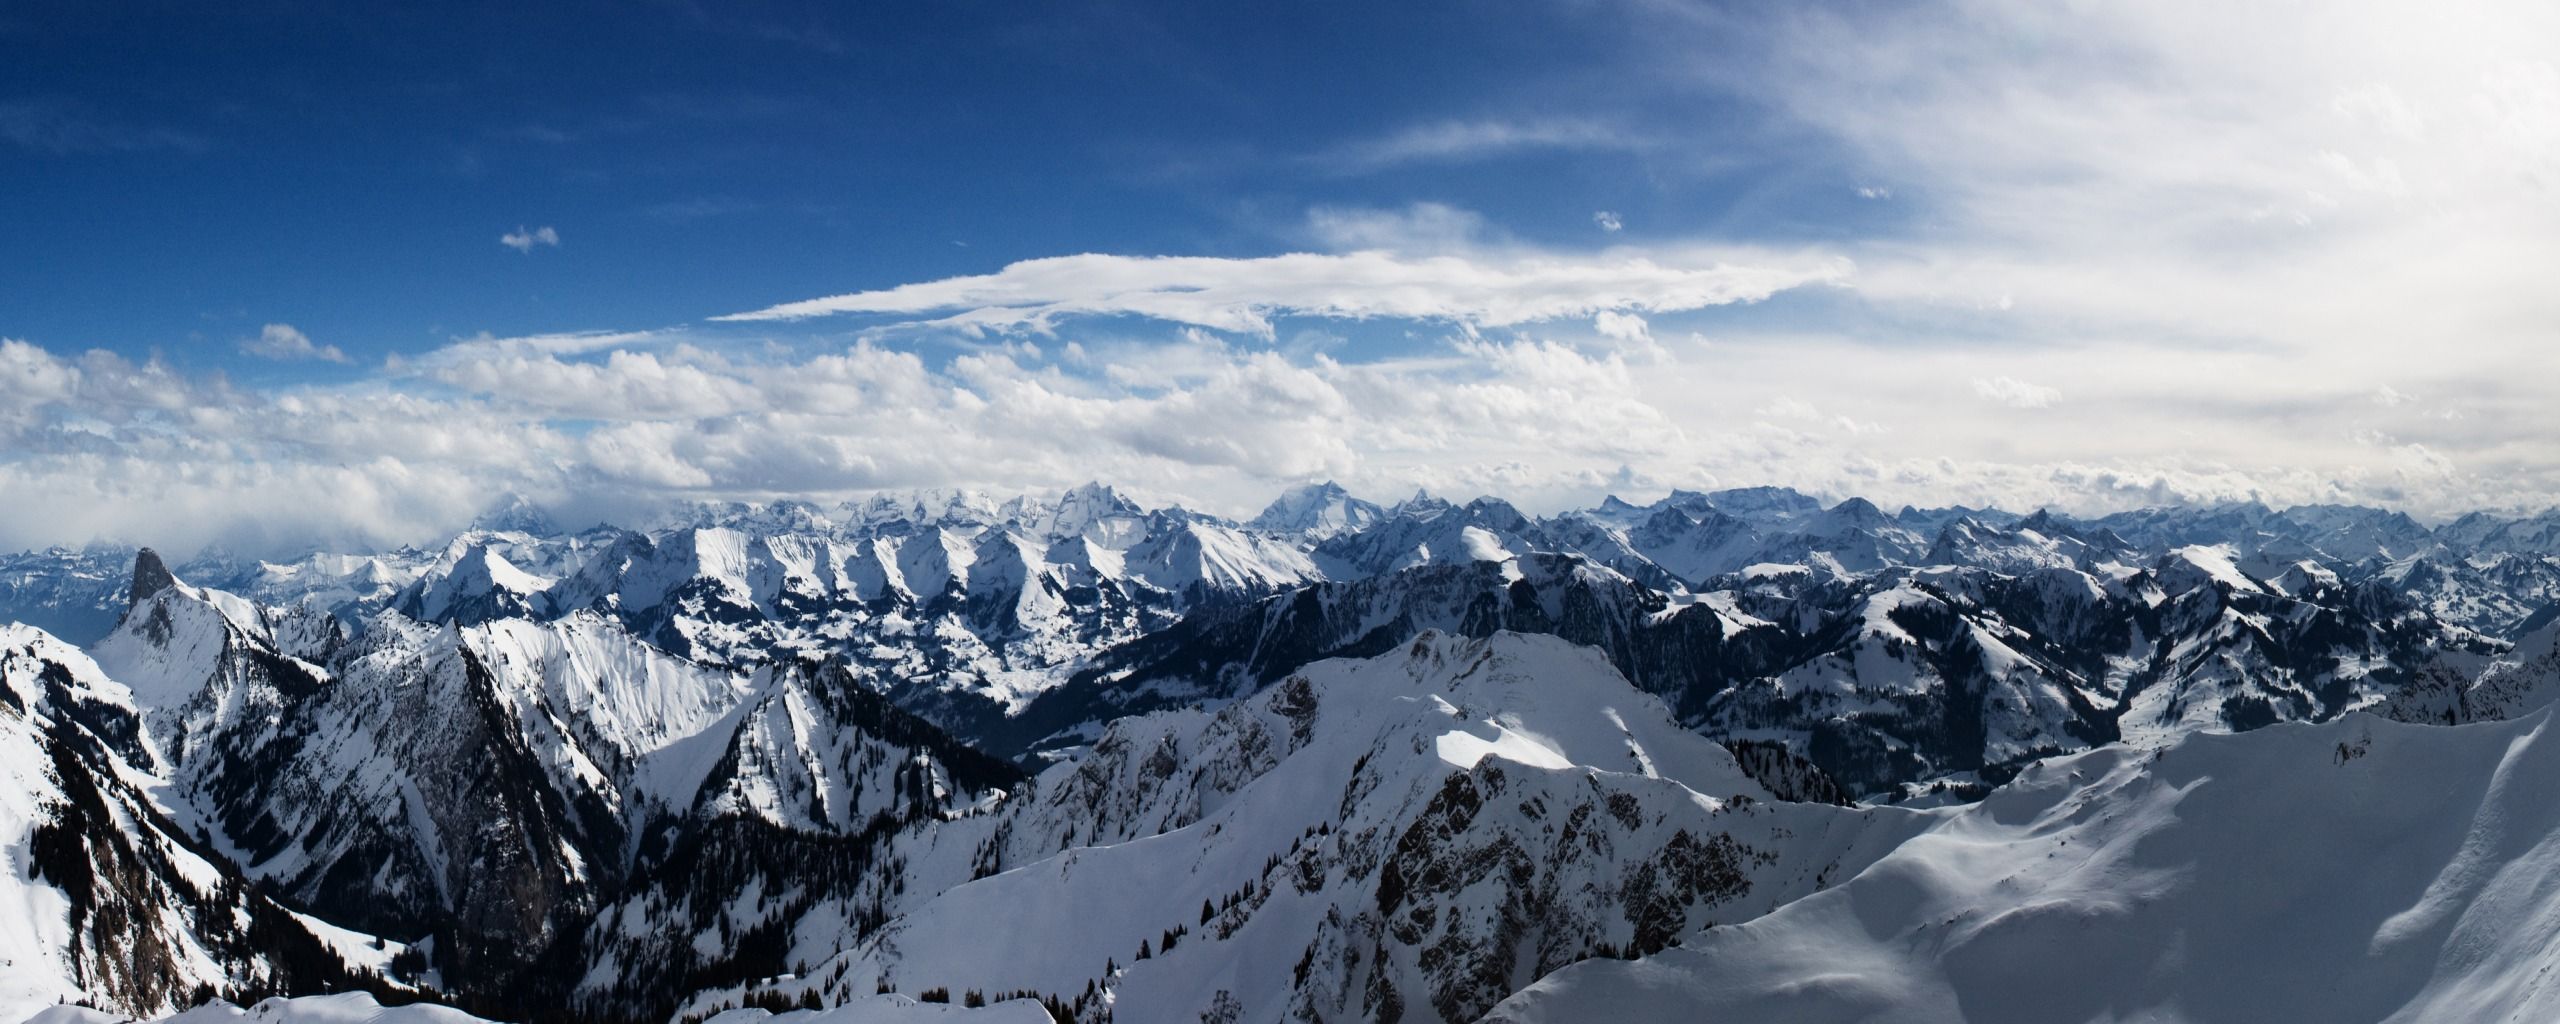 Alps Mountains Dual Monitor Wallpapers | HD Wallpapers